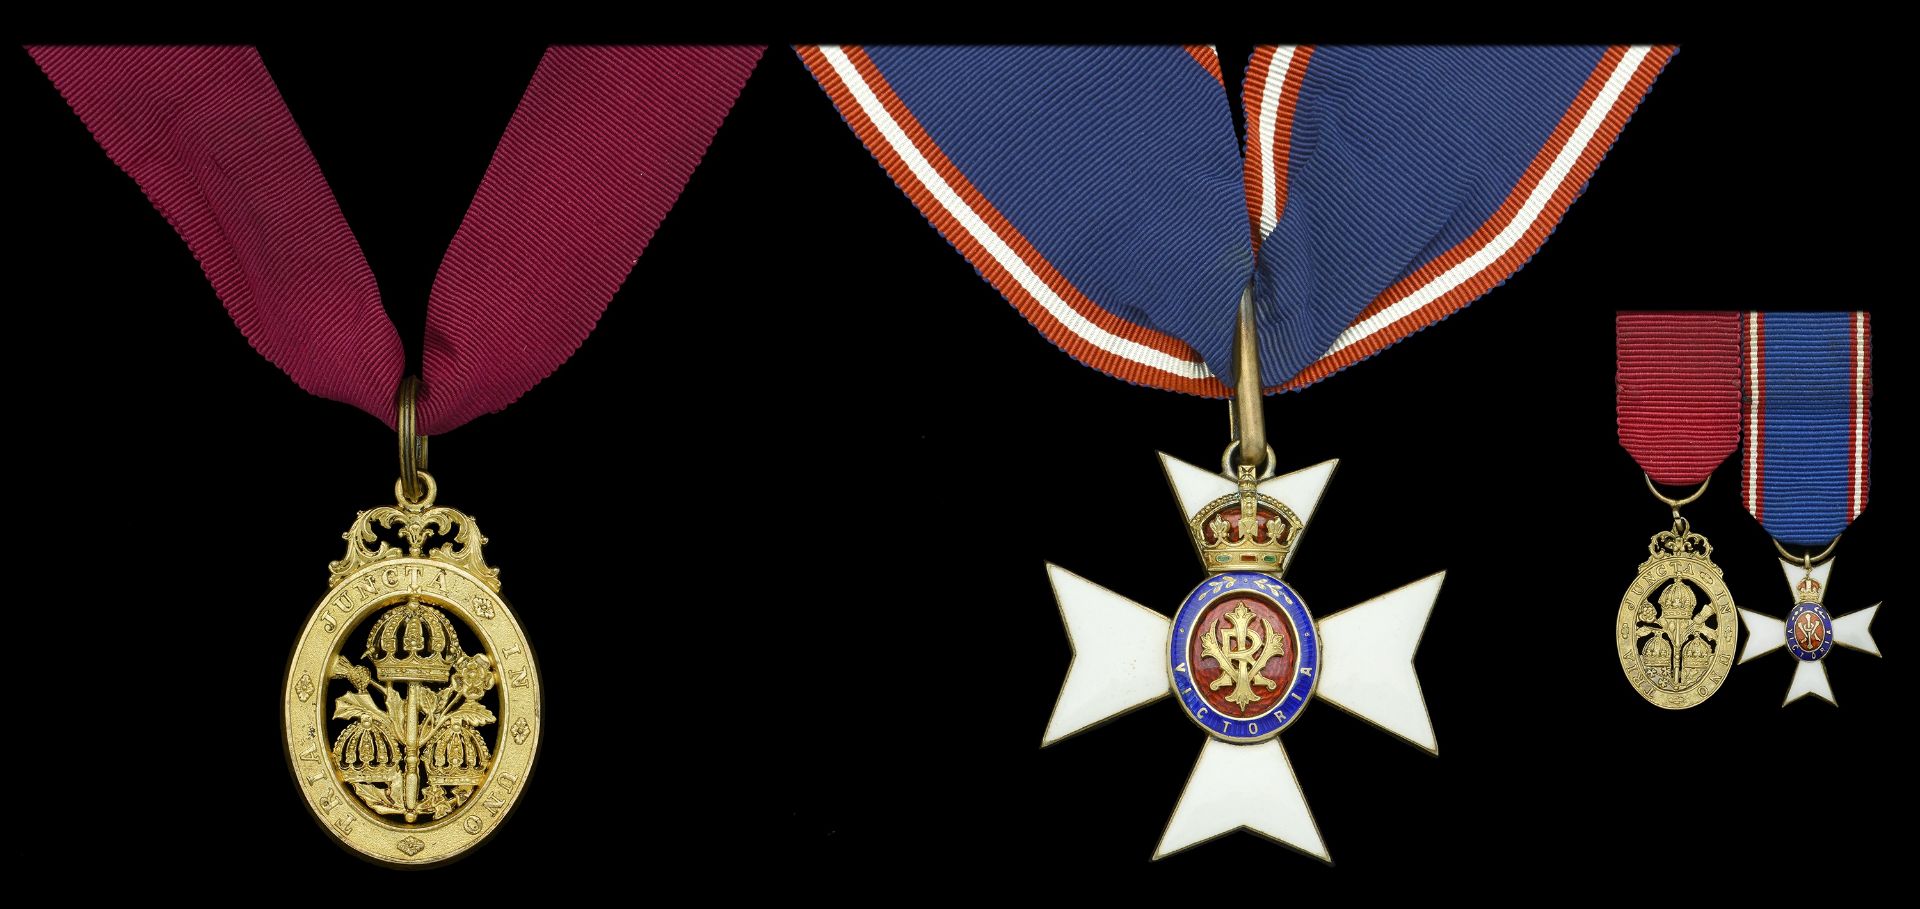 A post-War C.B., 1953 Coronation C.V.O. pair awarded to Eric Bedford, Esq., who served as Ch...